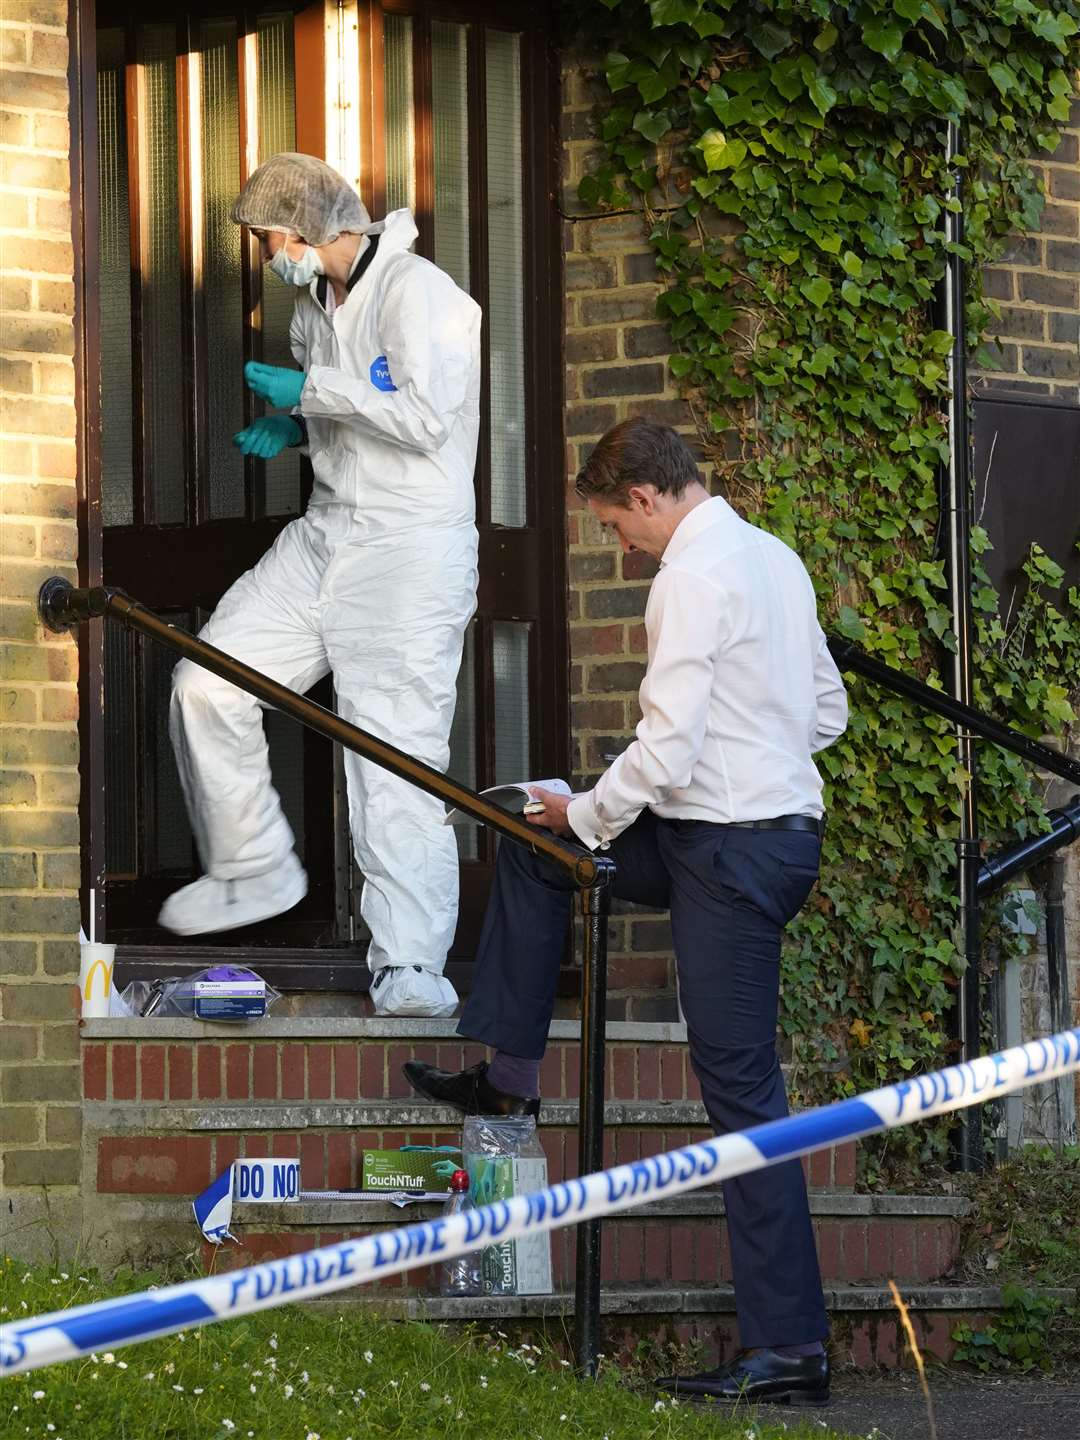 Forensic officers joined detectives at the scene yesterday afternoon. Picture: Andy Clark